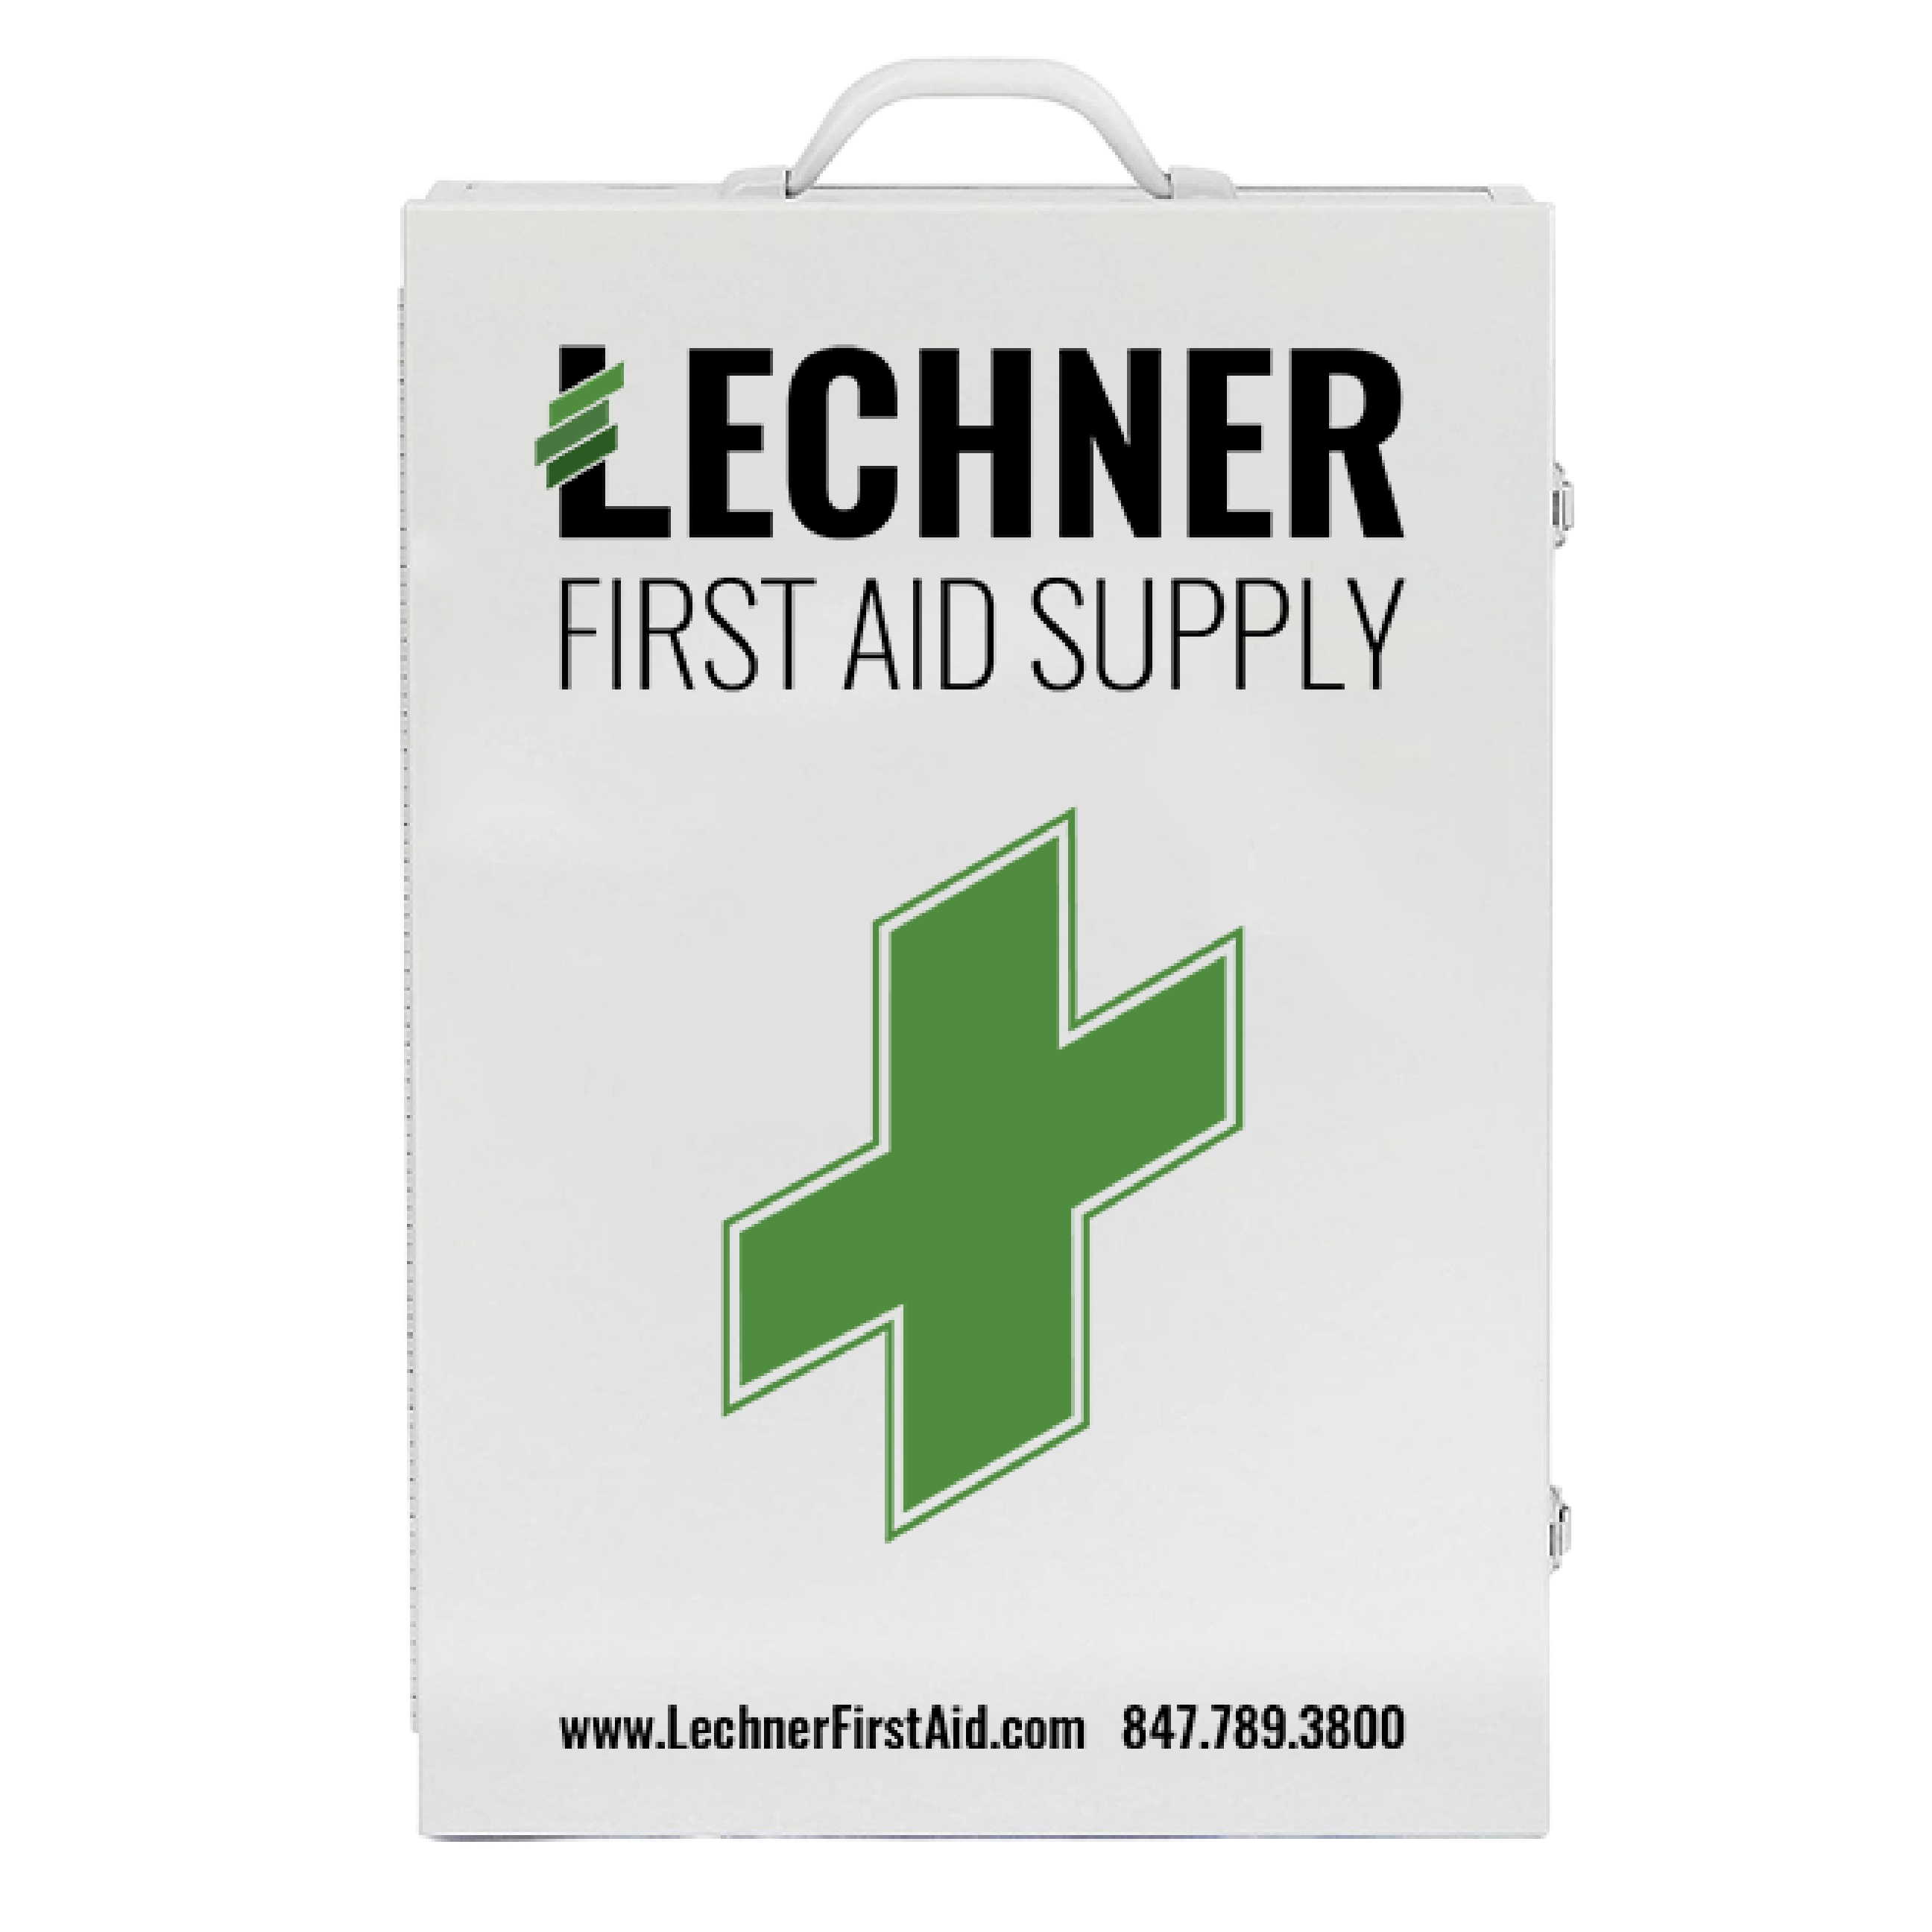 Lechner First Aid Supply kit